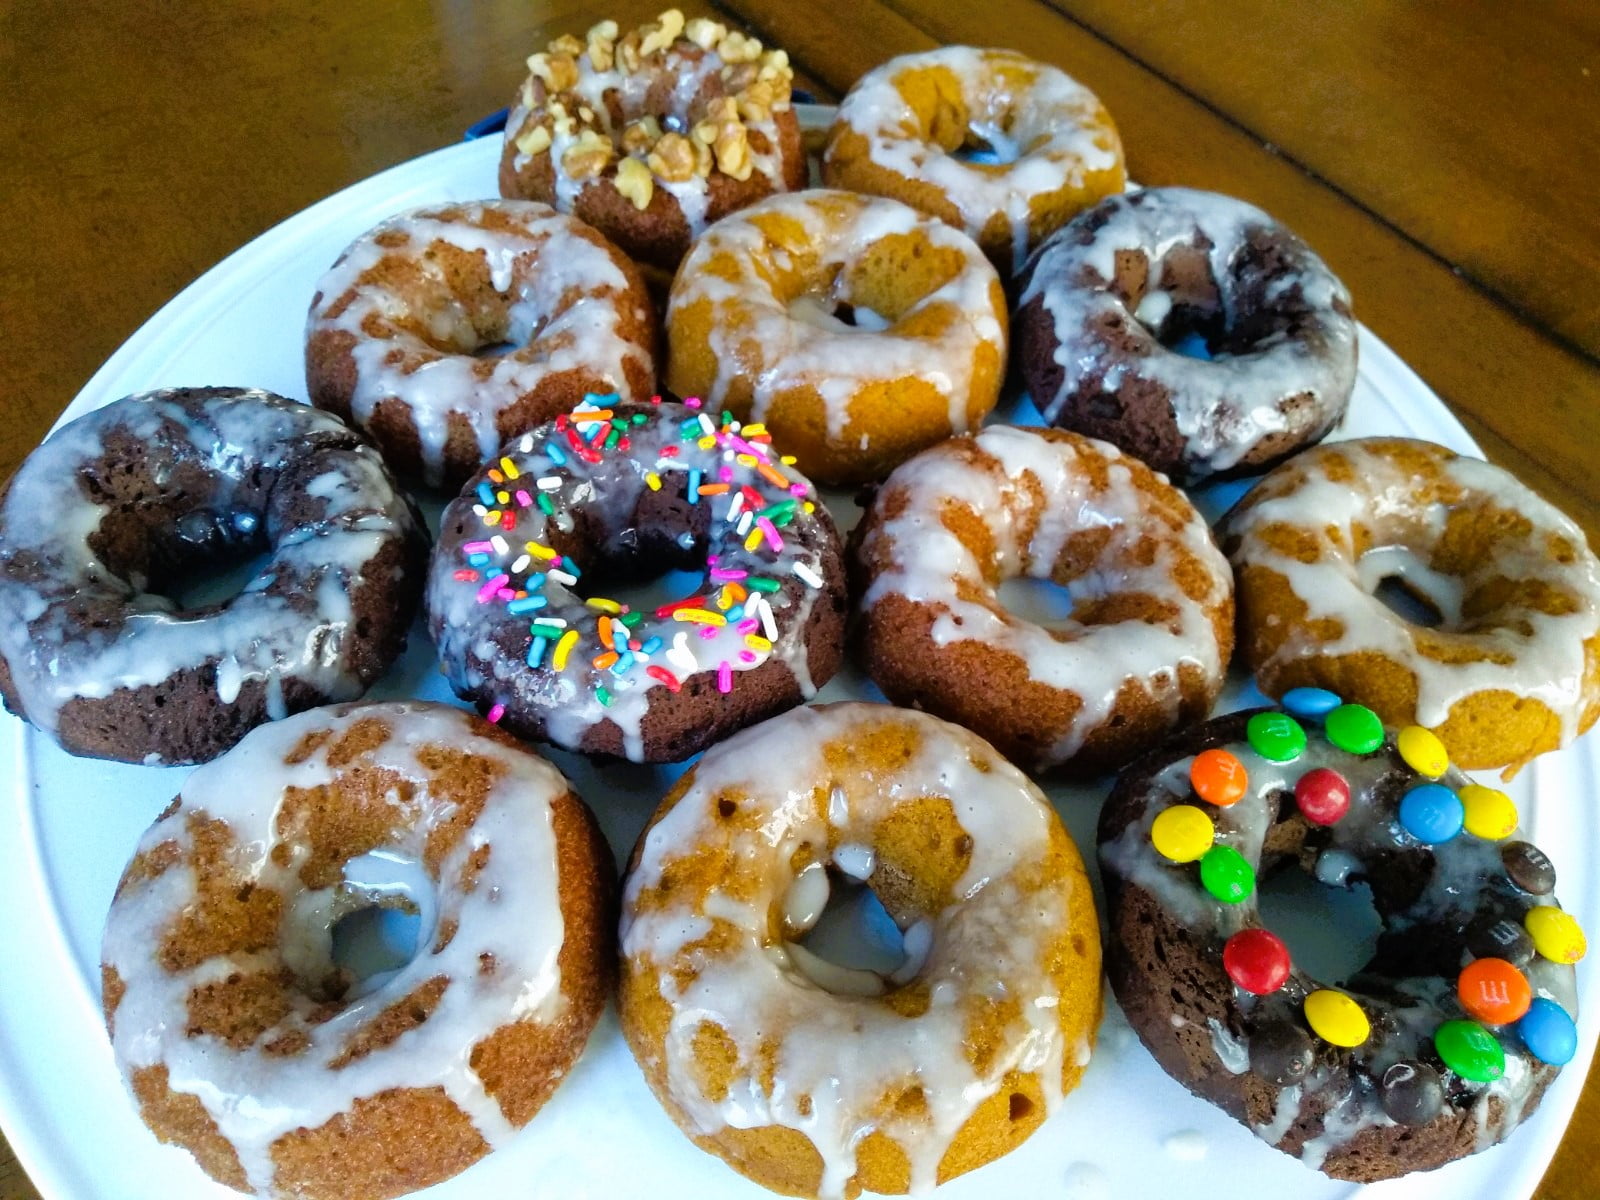 An iced assortment of fresh baked doughnuts. Some have walnuts, or sprinkles, or candy.